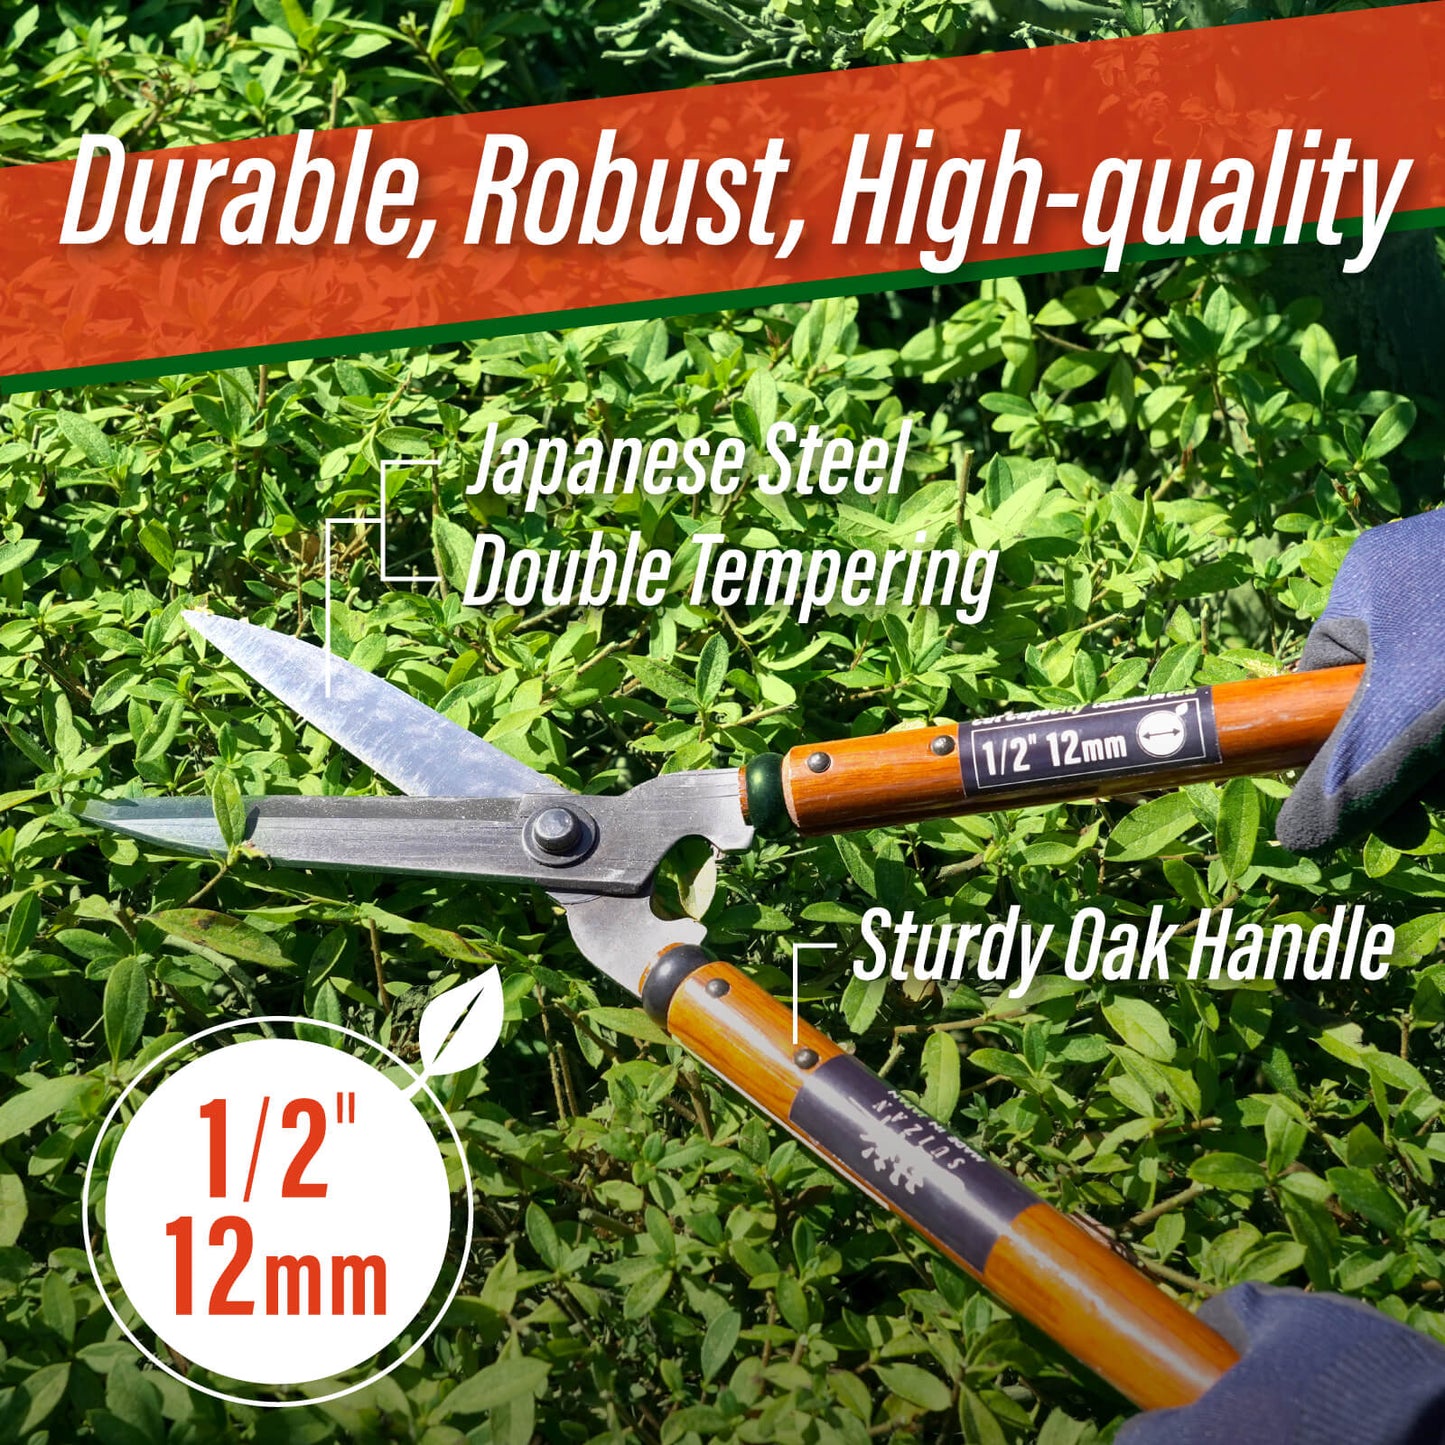 SUIZAN Japanese Hedge Shears 21.3" - Professional Garden Clippers for Precise Trimming